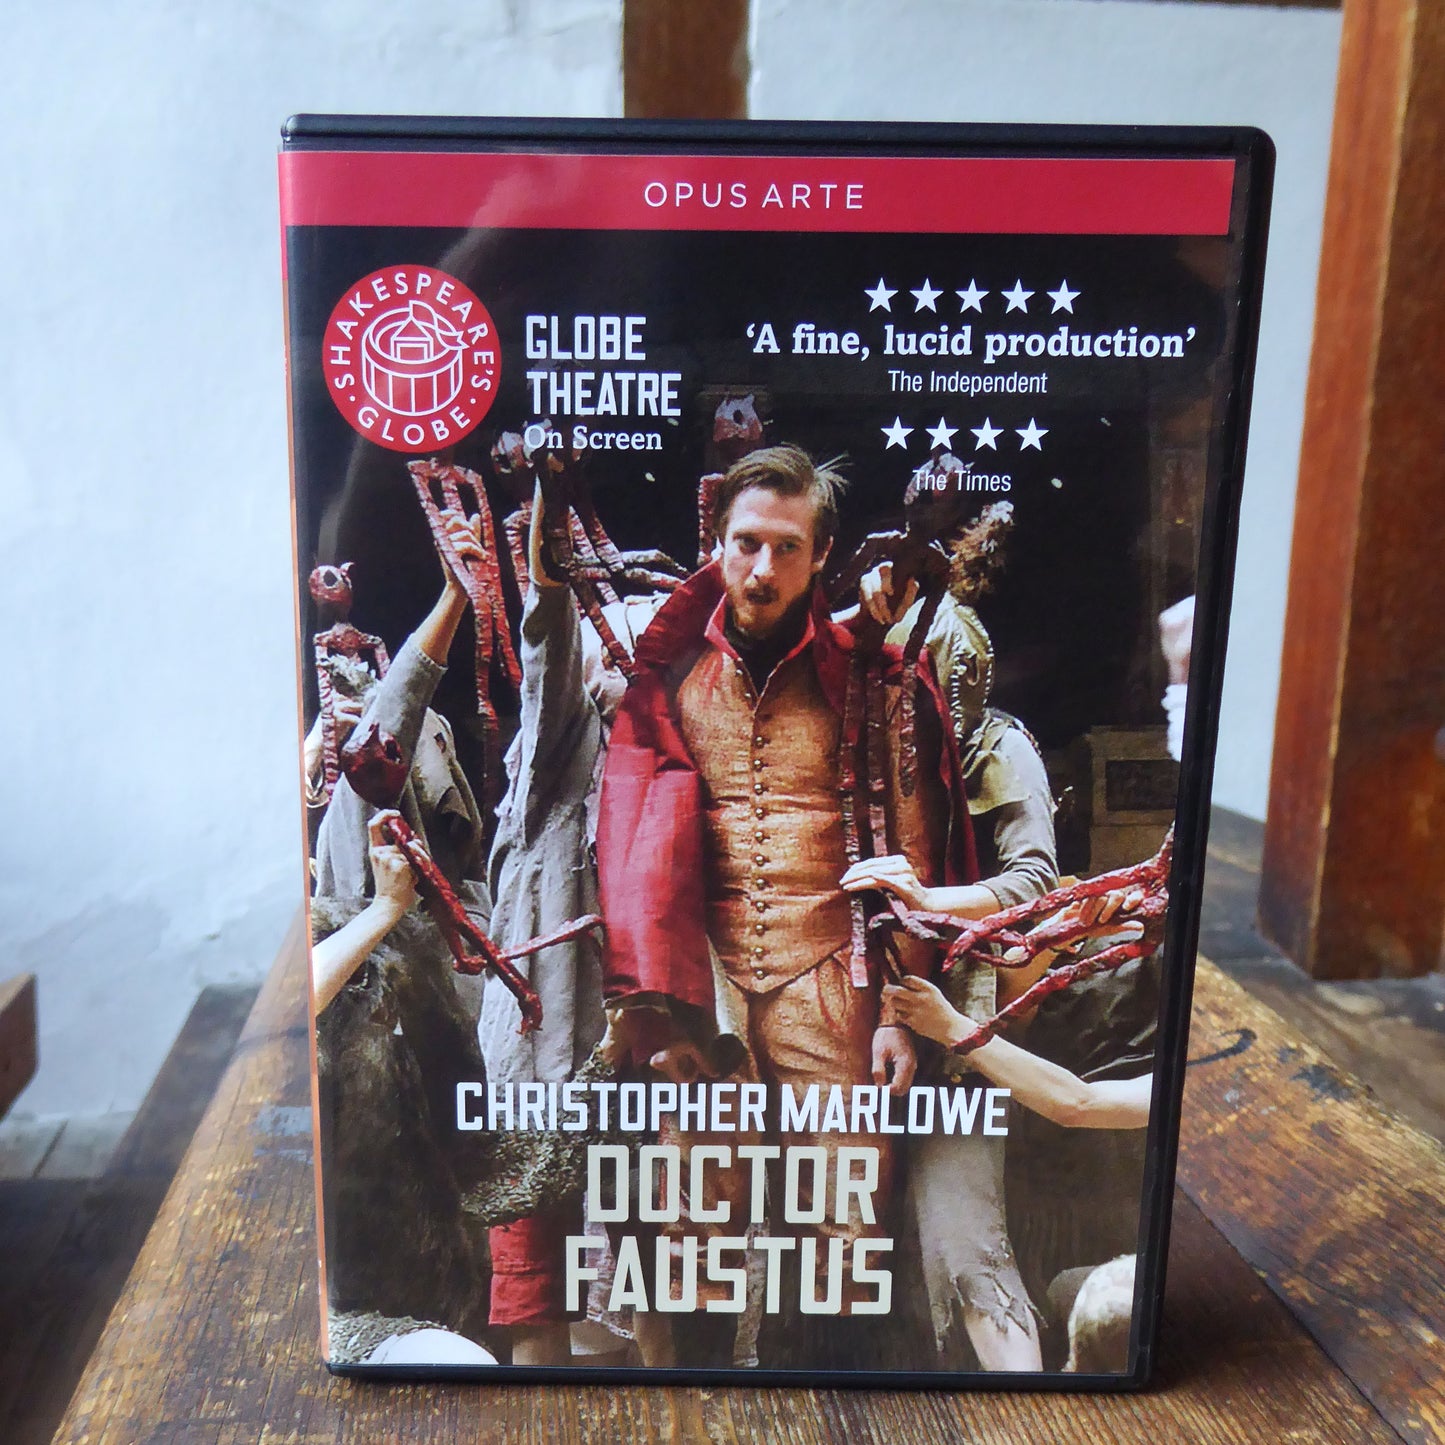 DVD of Shakespeare's Globe 2011 production of Doctor Faustus. Performed and recorded in Shakespeare's Globe.